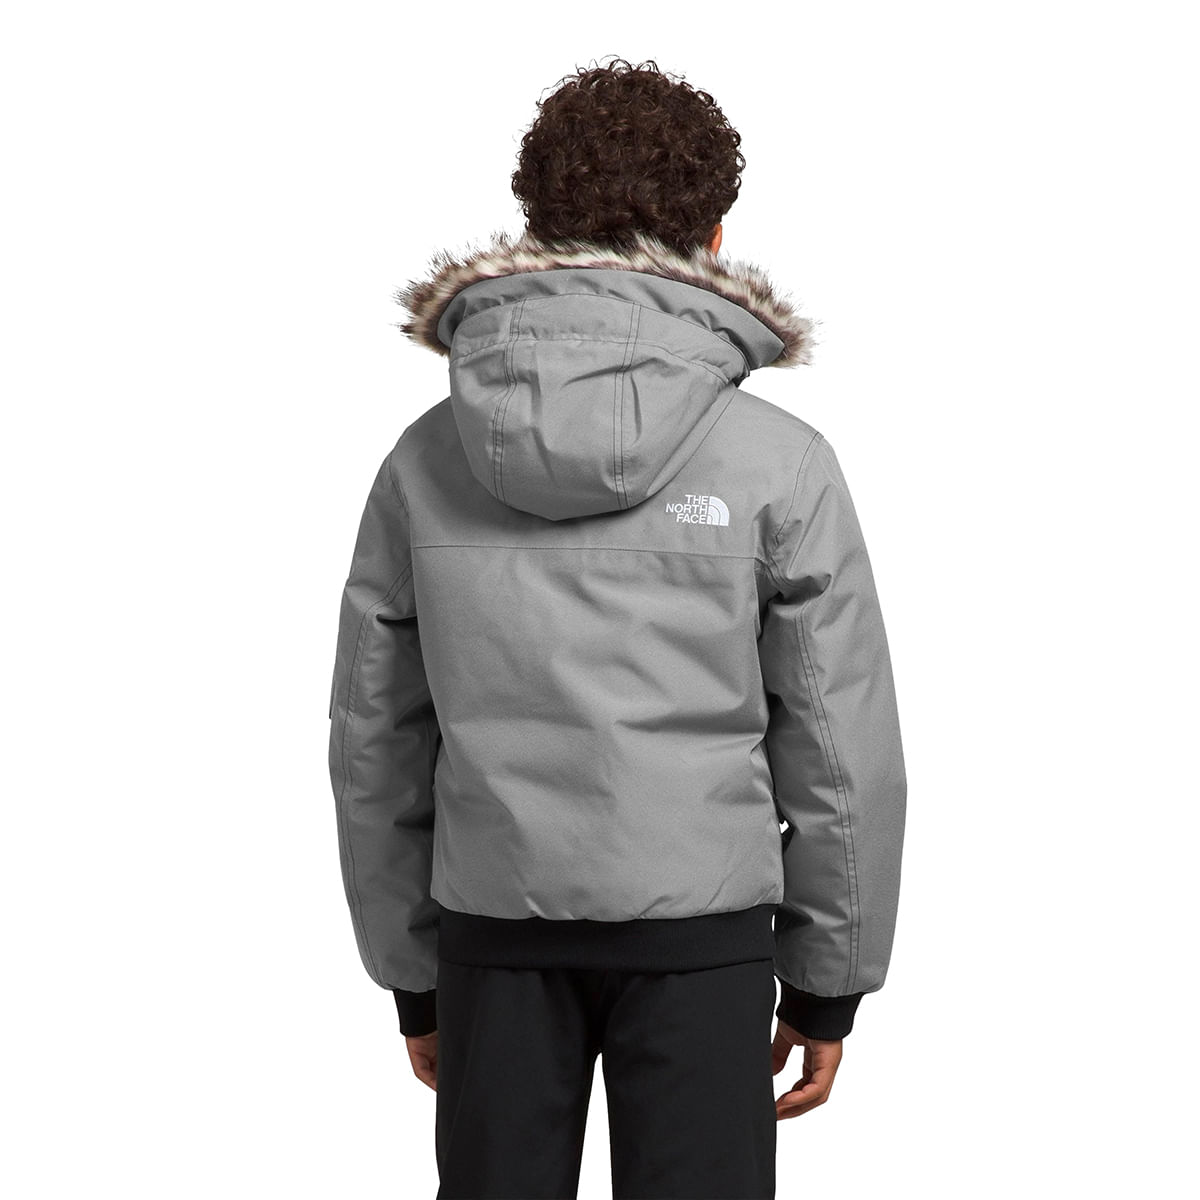 The North Face Kids BOYS- GOTHAM JACKET TNF MEDIUM GREY - Paragon Sports:  NYC's Best Specialty Sports Store